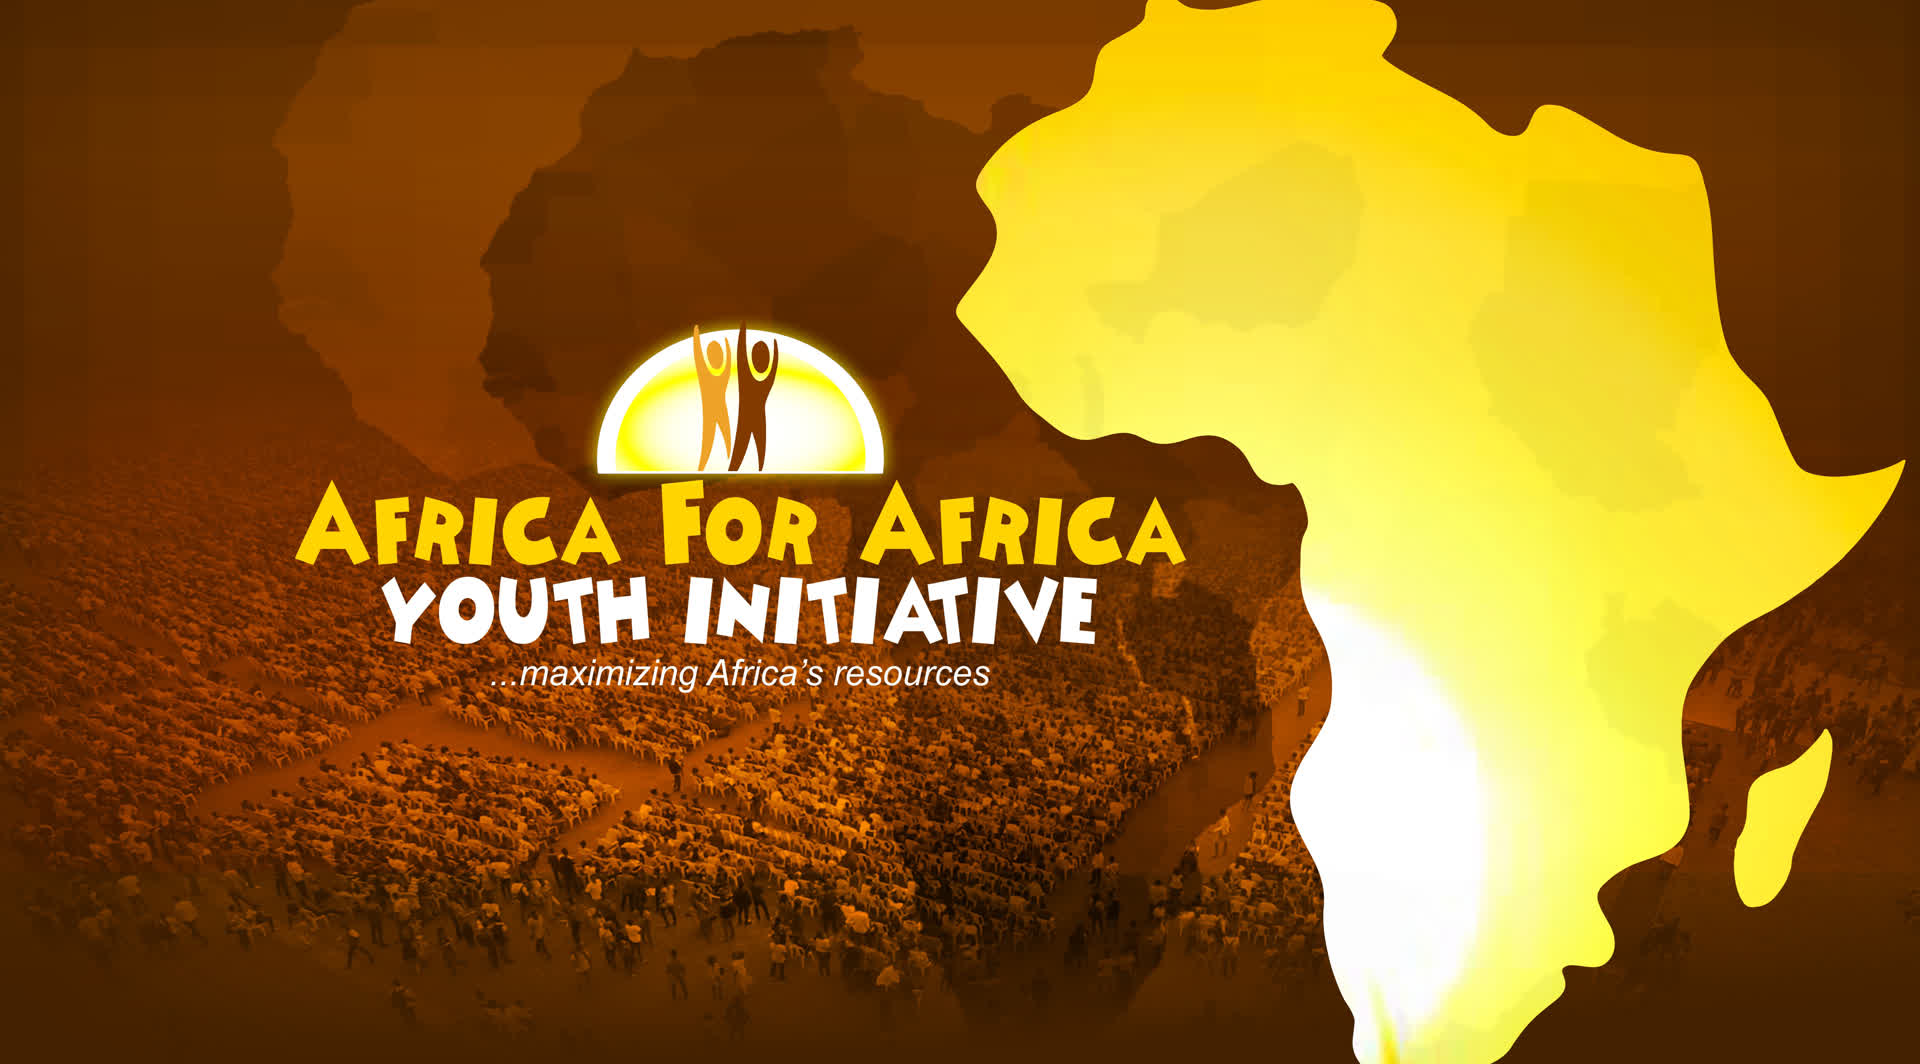 A4a Maximizing Africa’s Resources